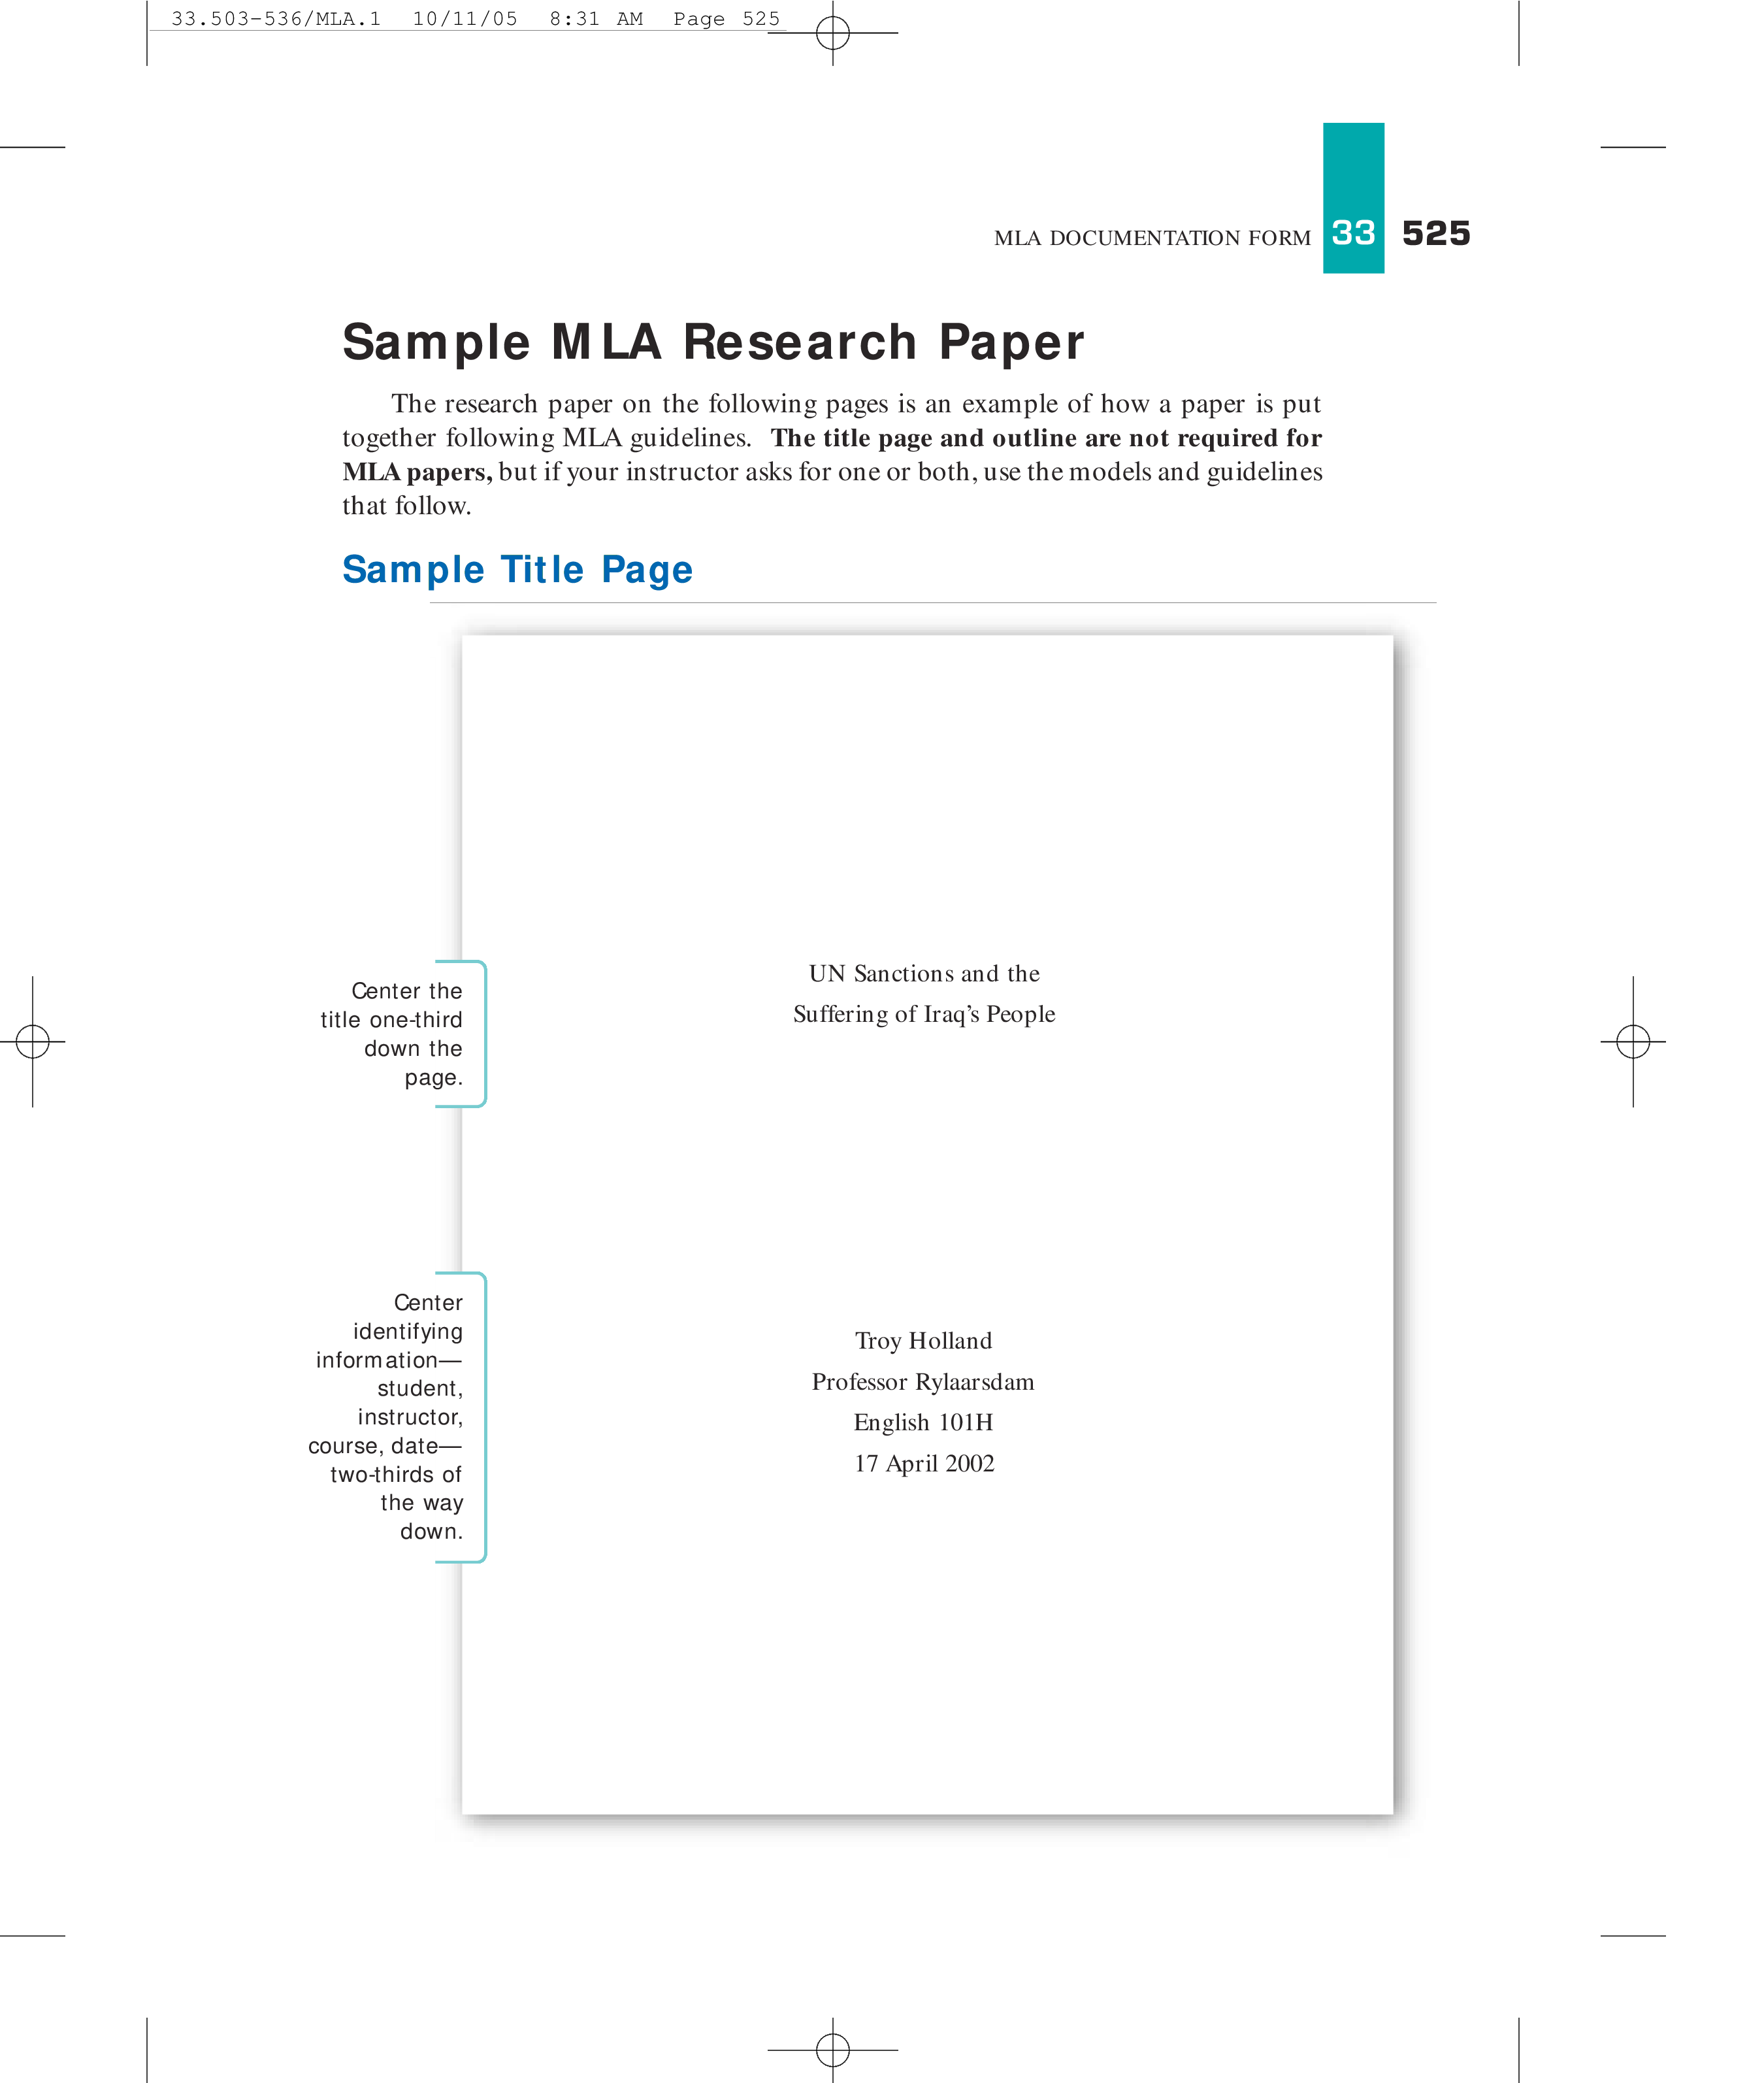 sample title page for mla research paper